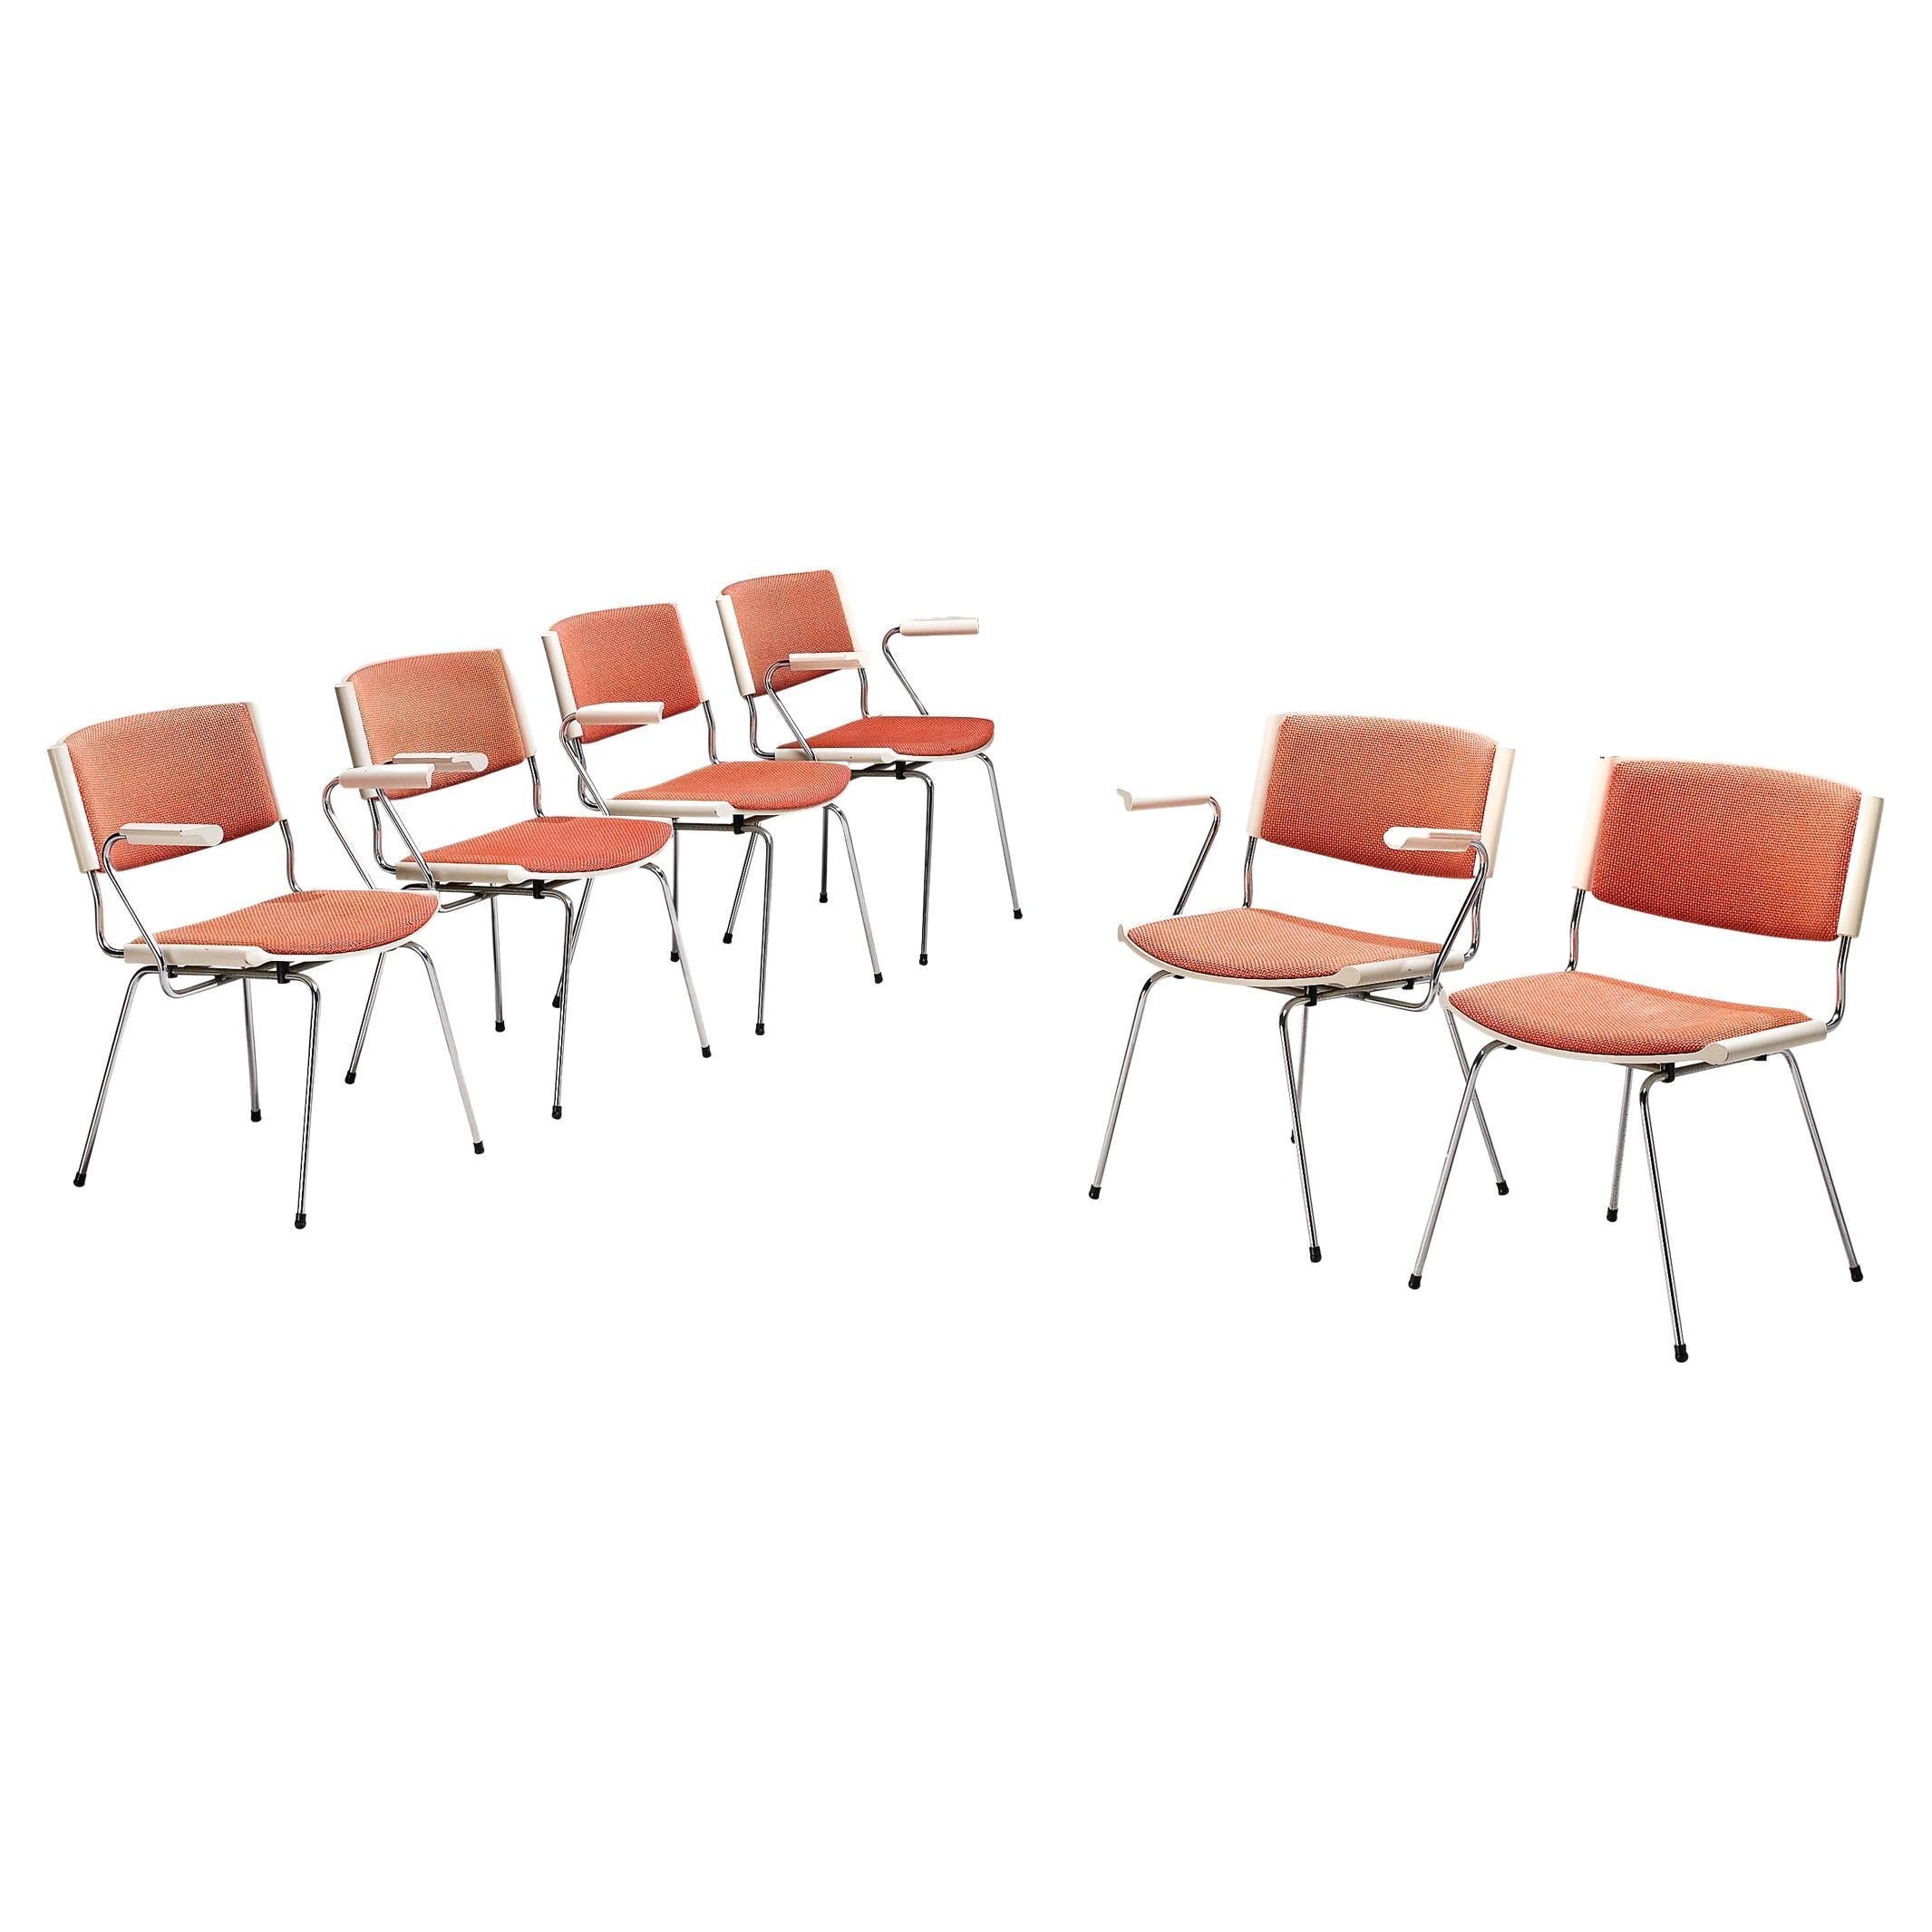 Rare Nanna and Jørgen Ditzel Set of Six 'Badminton' Chairs in Salmon Pink Fabric For Sale